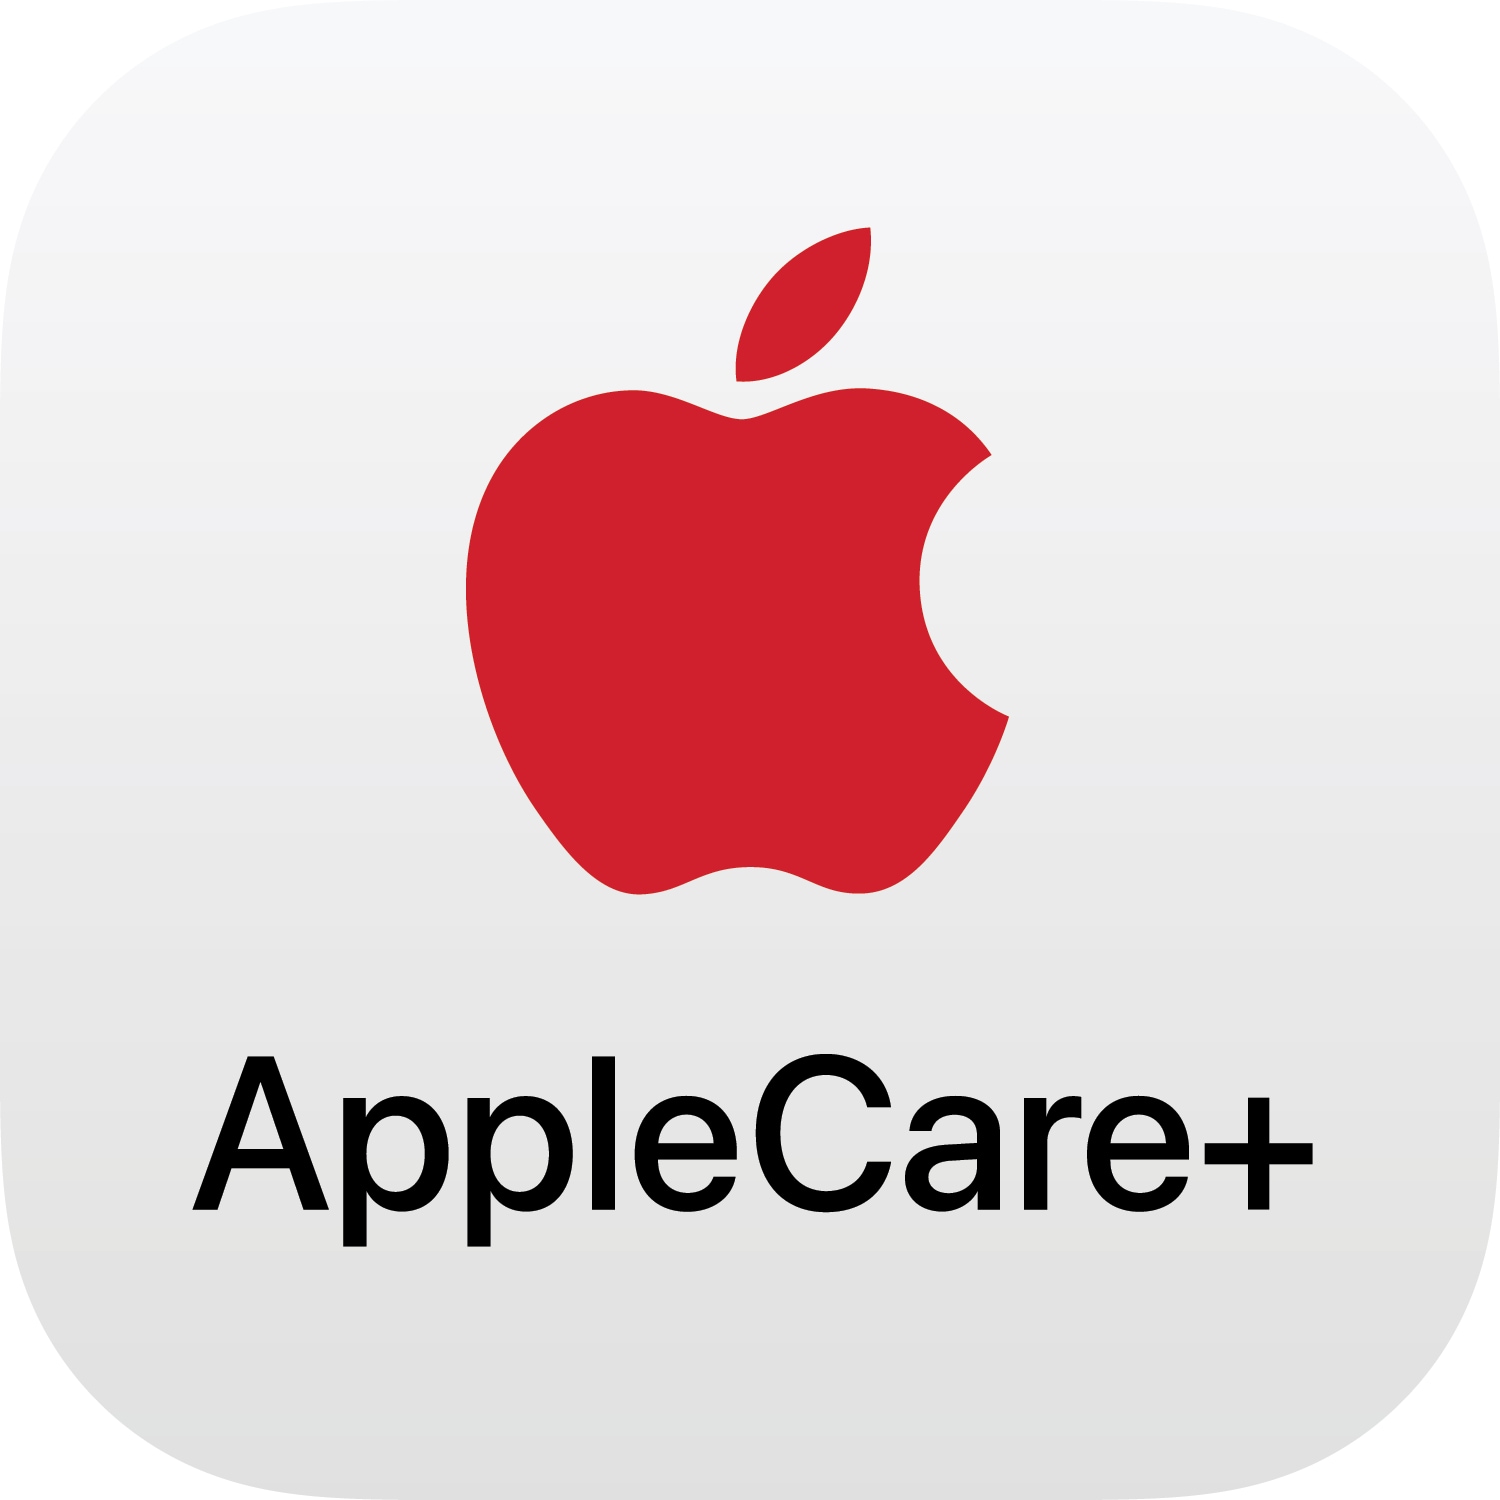 APPLECARE+ FOR APPLE WATCH ULTRA TI